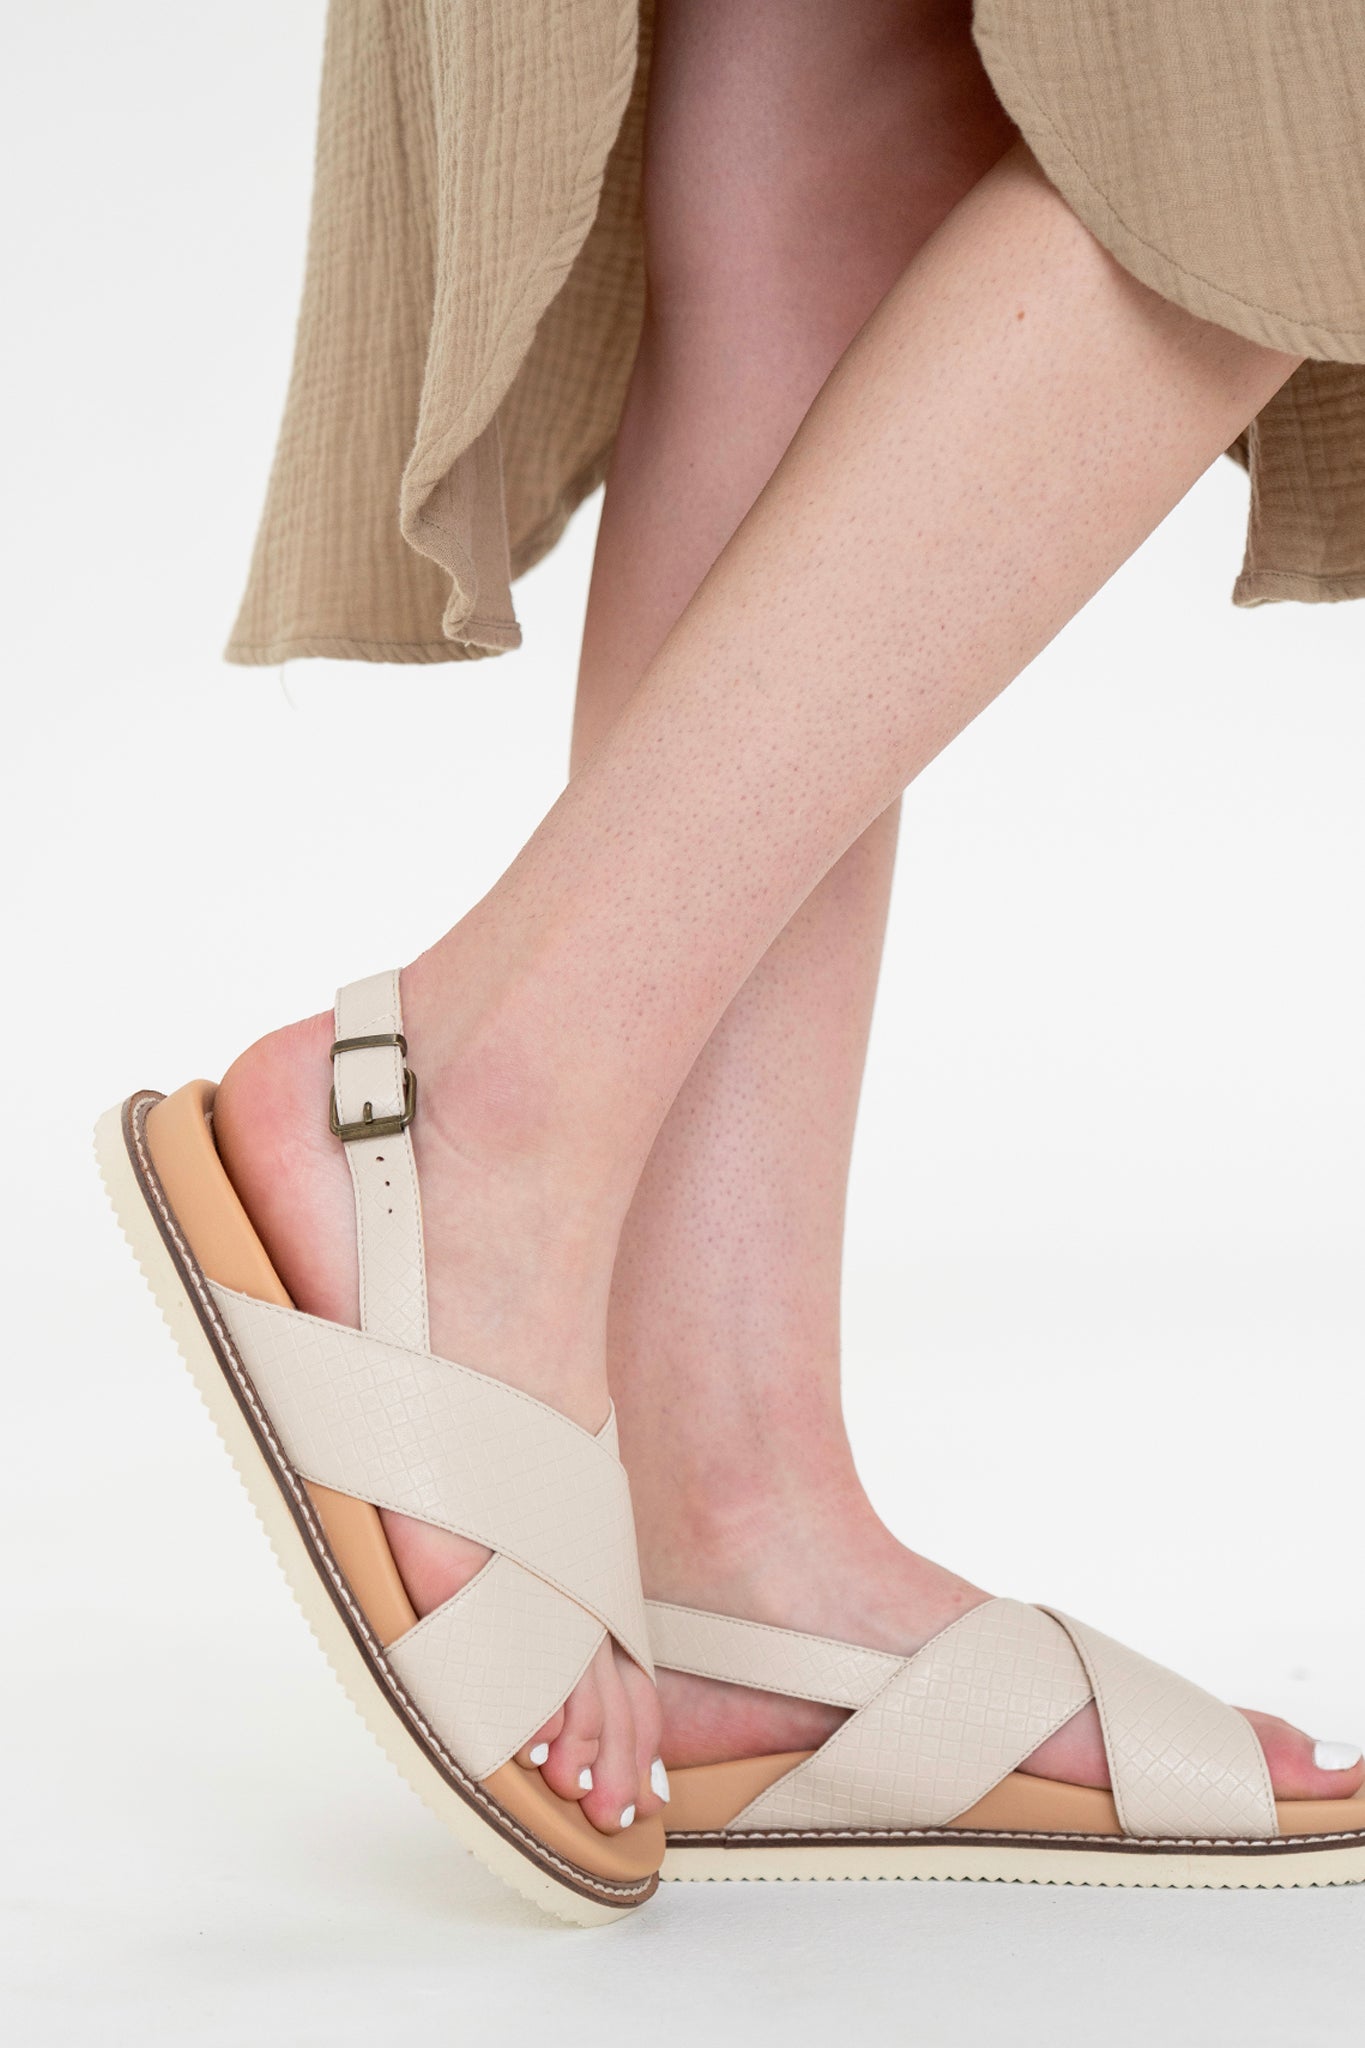 View 1 of Oasis Society Andie Strappy Sandal, a Shoes from Larrea Cove. Detail: The Oasis Society Andie Strappy Sandal is ...